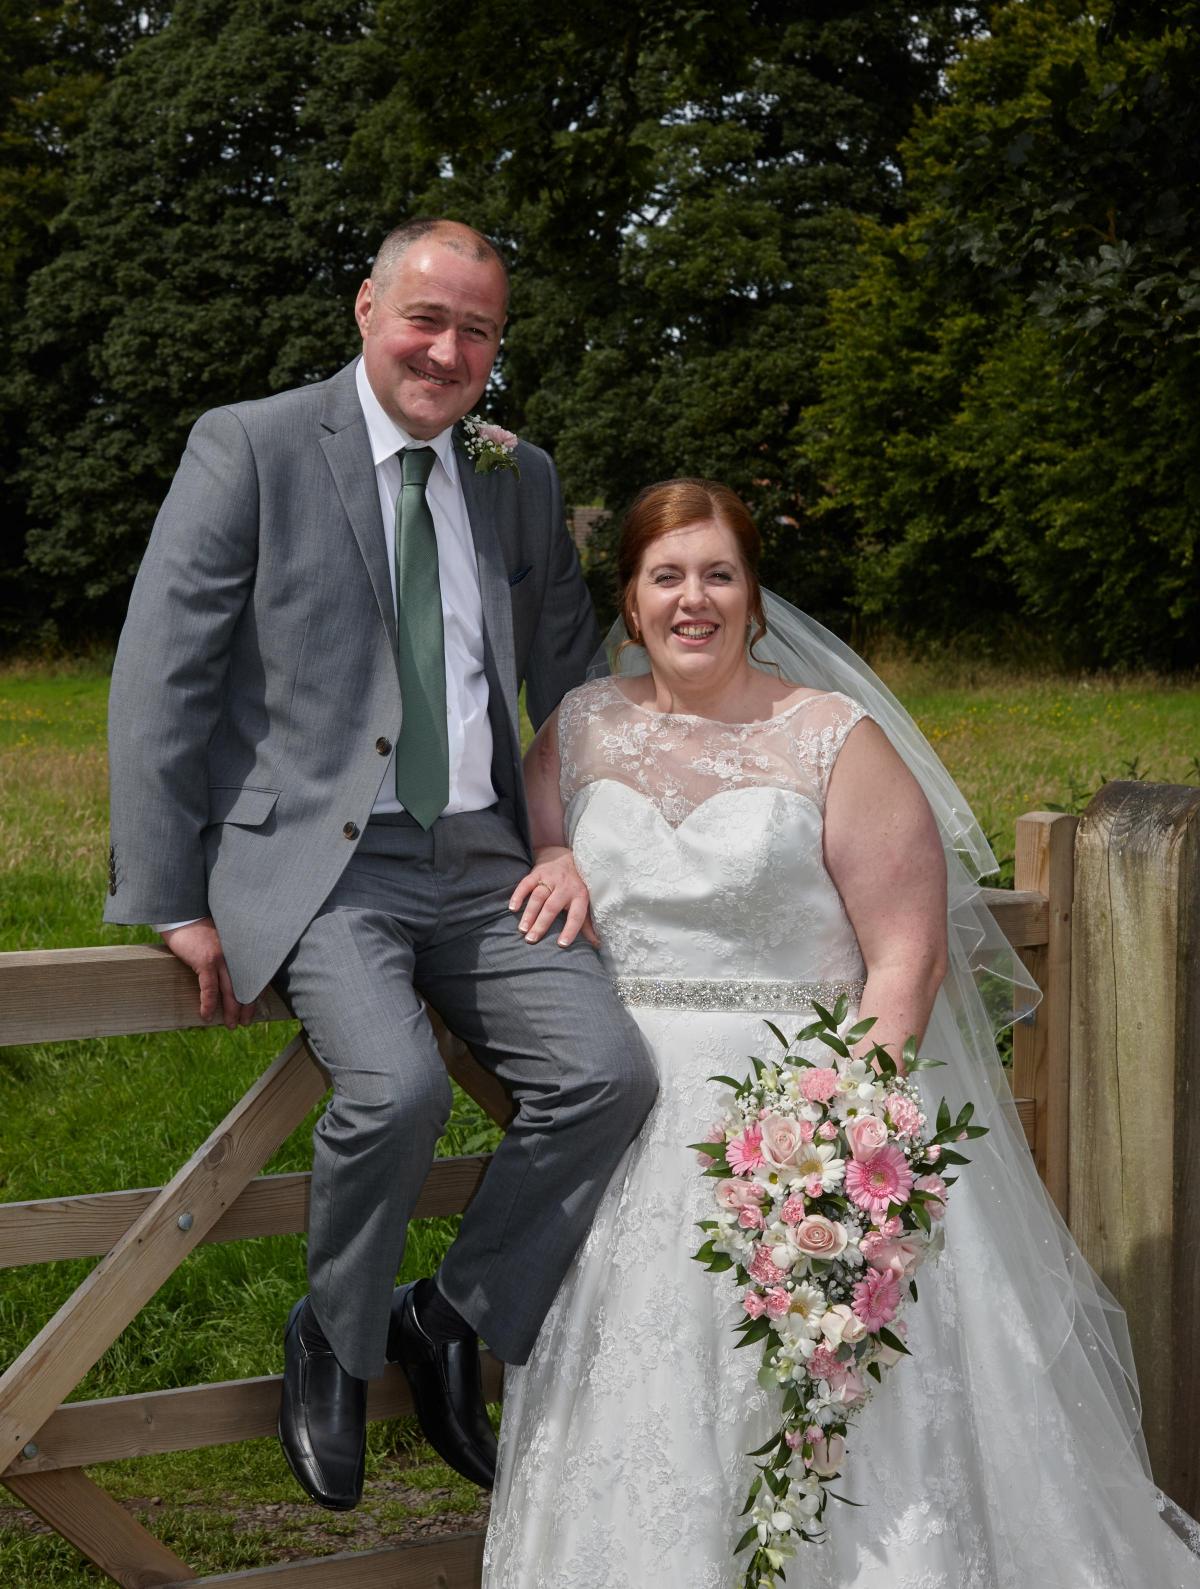 Alan Threlkeld married Stephanie Janet Robinson at Lanercost Priory, Lanercost, in Cumbria